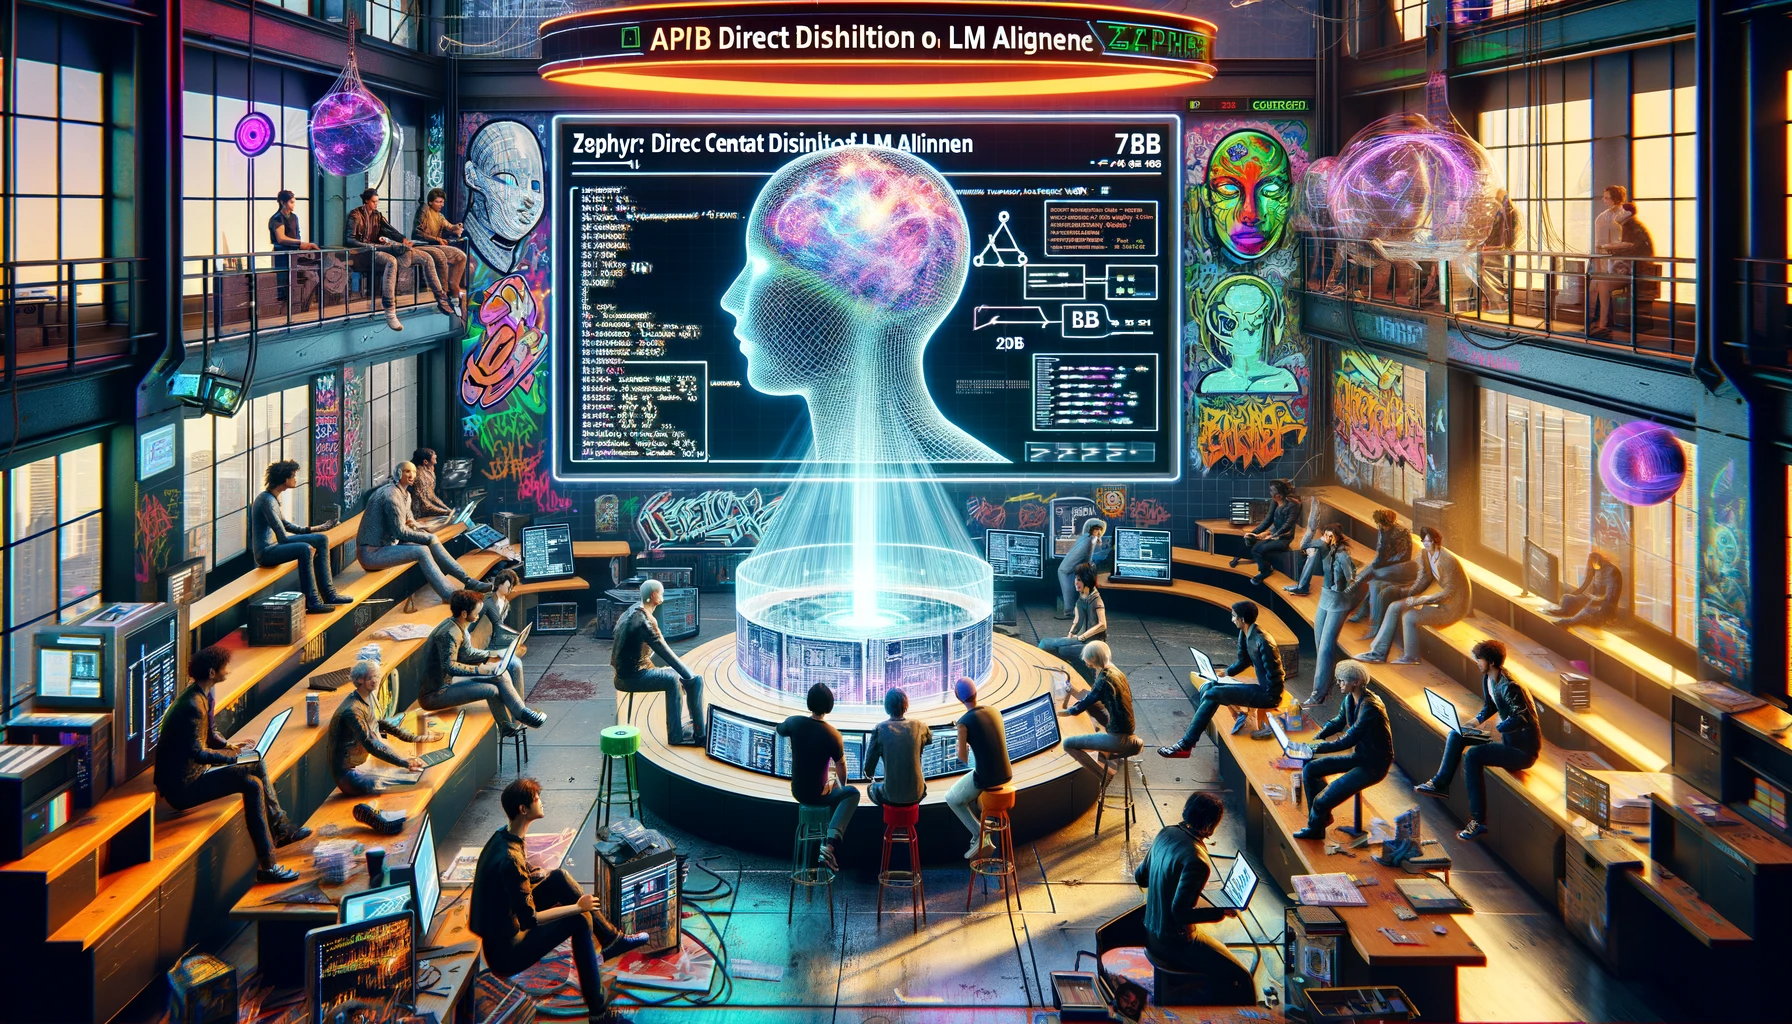 Imagine a high-tech AI lab, buzzing with energy. The lab is filled with researchers (both human and AI) engaged in lively discussions. In the center, there's a large holographic display showing the ZEPHYR-7B model, surrounded by smaller screens displaying various data visualizations and code snippets. The room has a punk aesthetic, with graffiti art symbolizing key concepts from the paper.